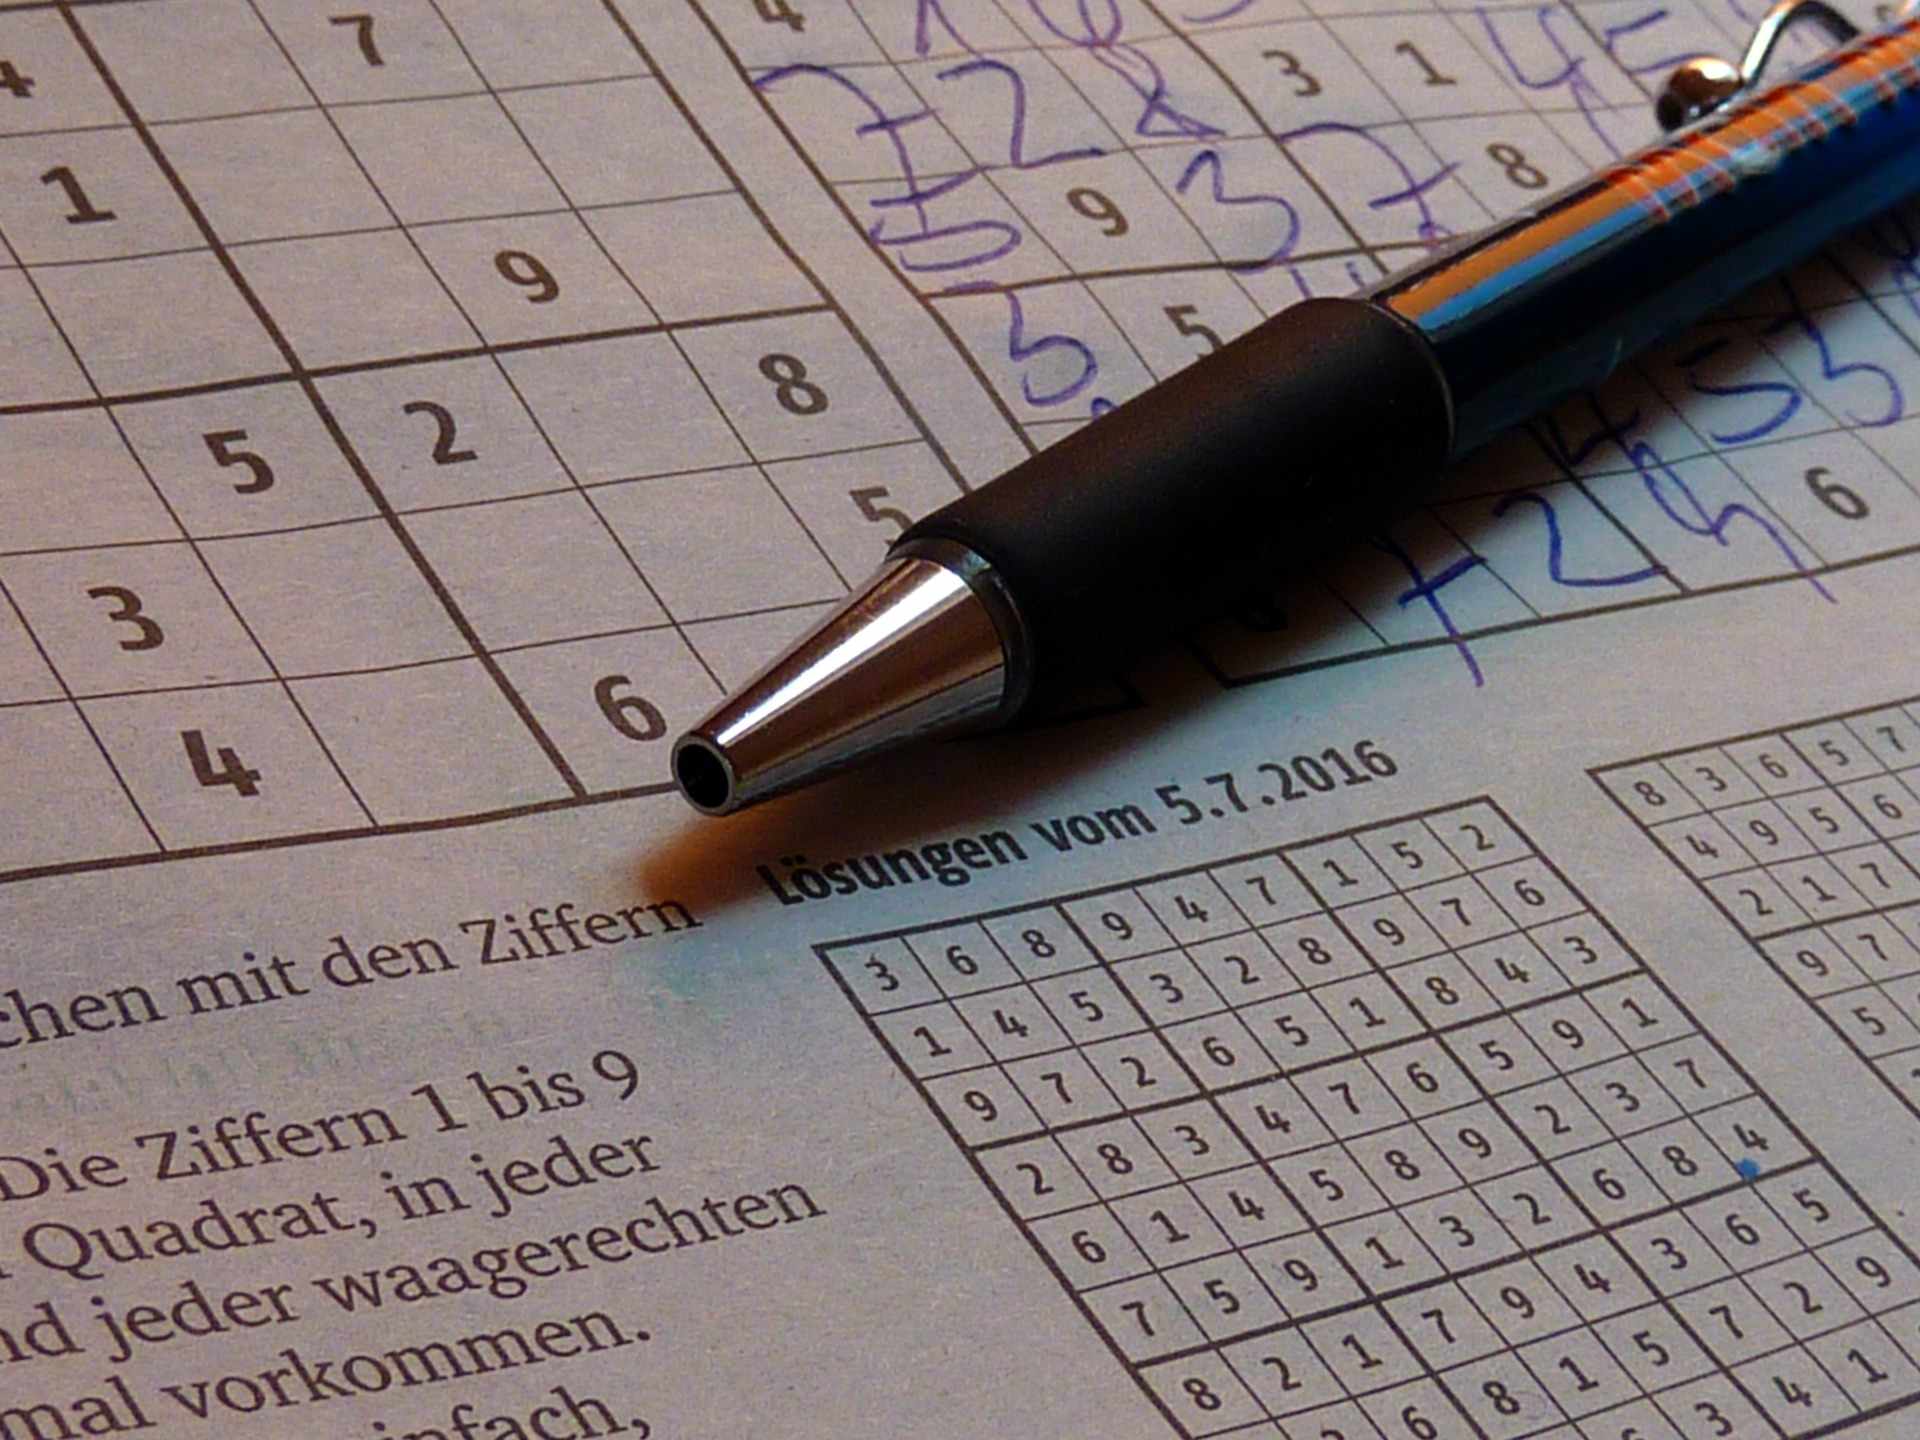 What is sudoku and who invented it